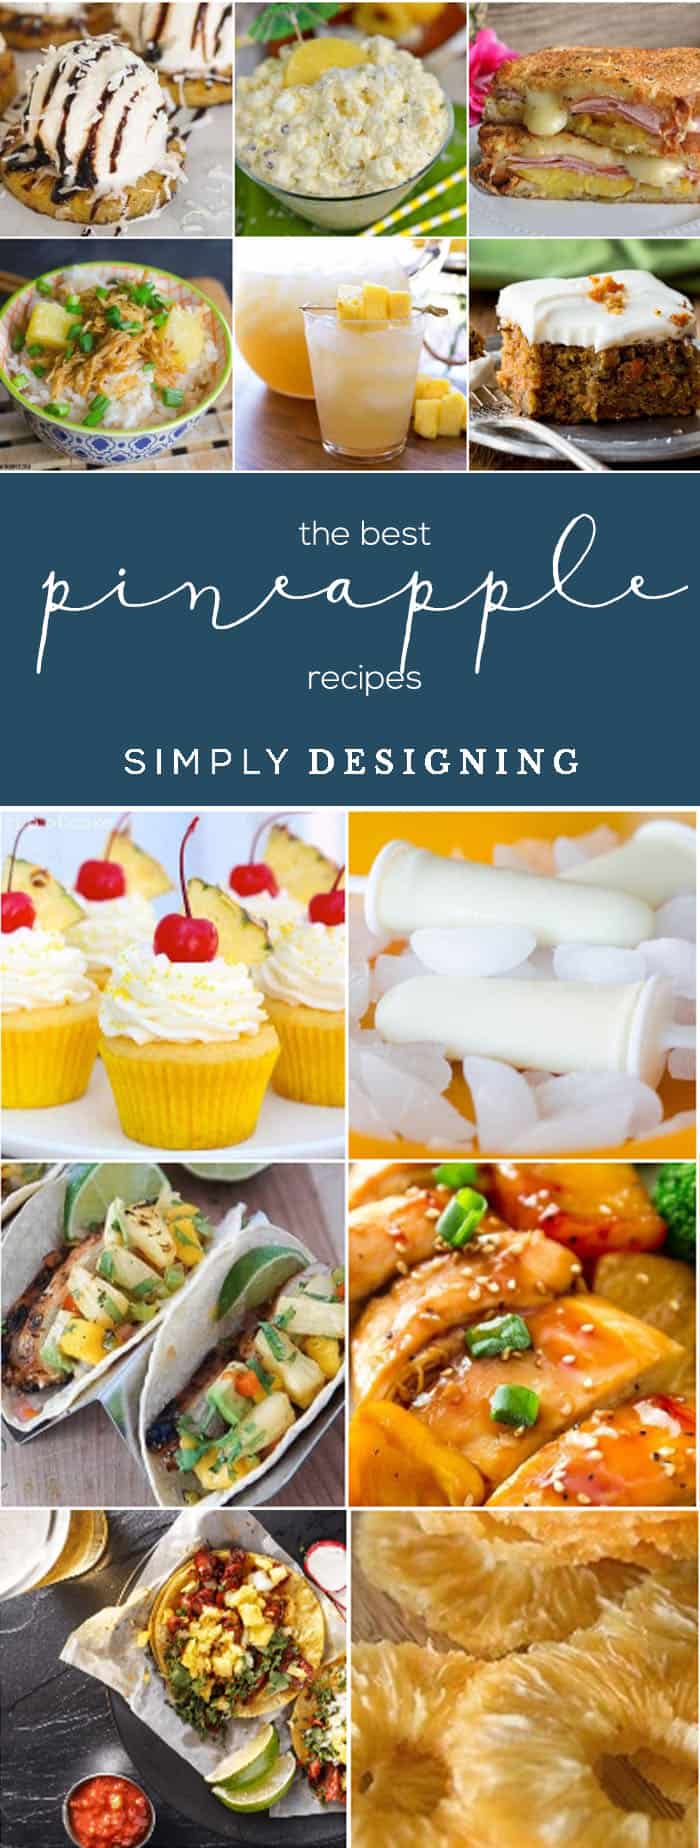 the best pineapple recipes pin 25+ Pineapple Recipes for the Perfect Summer Treat 29 Valentine's Day Sweets